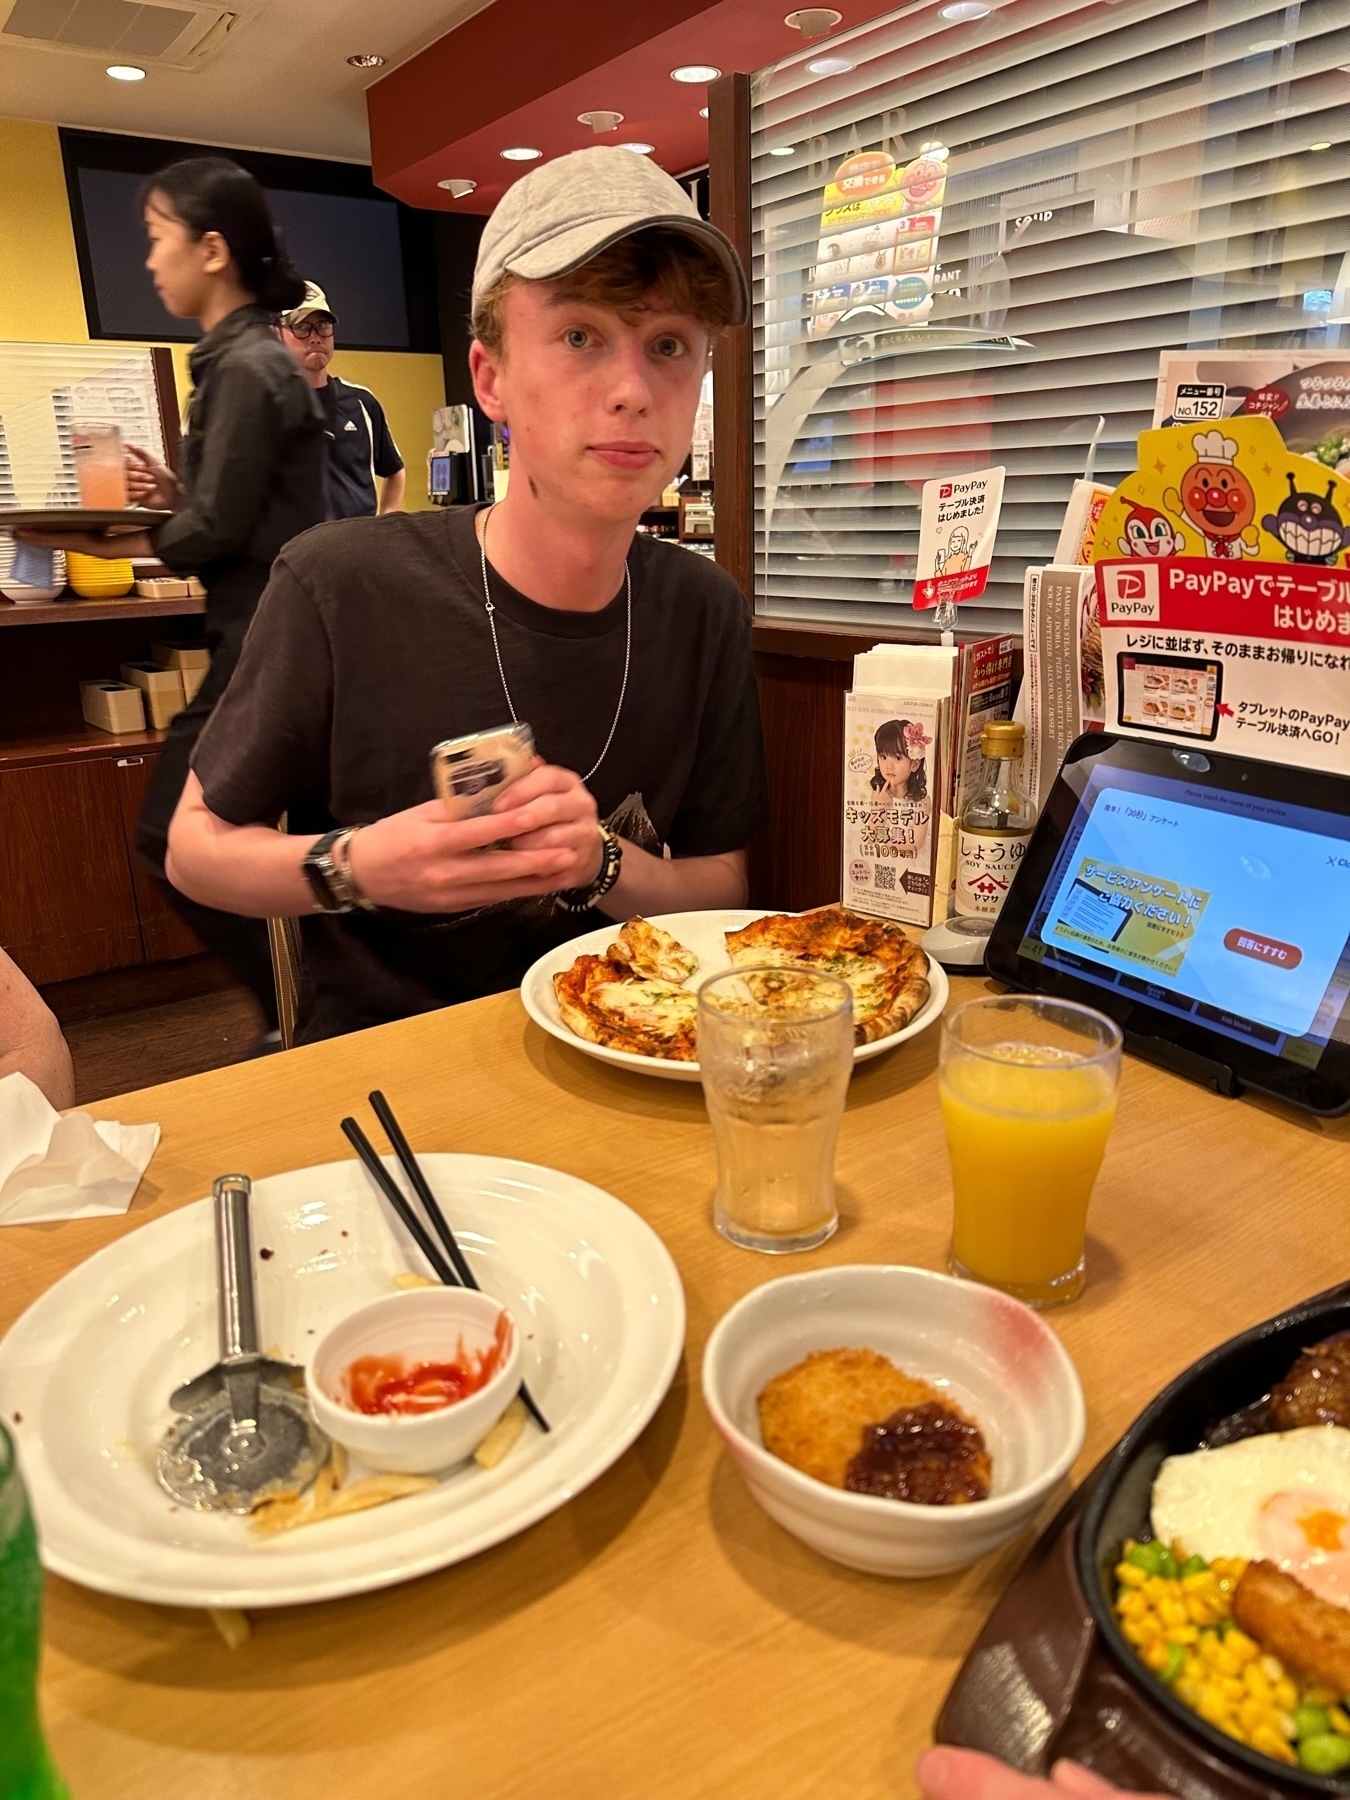 My son sitting at a restaurant table with various dishes including pizza, eggs, and corn, holding a can with a surprised expression.